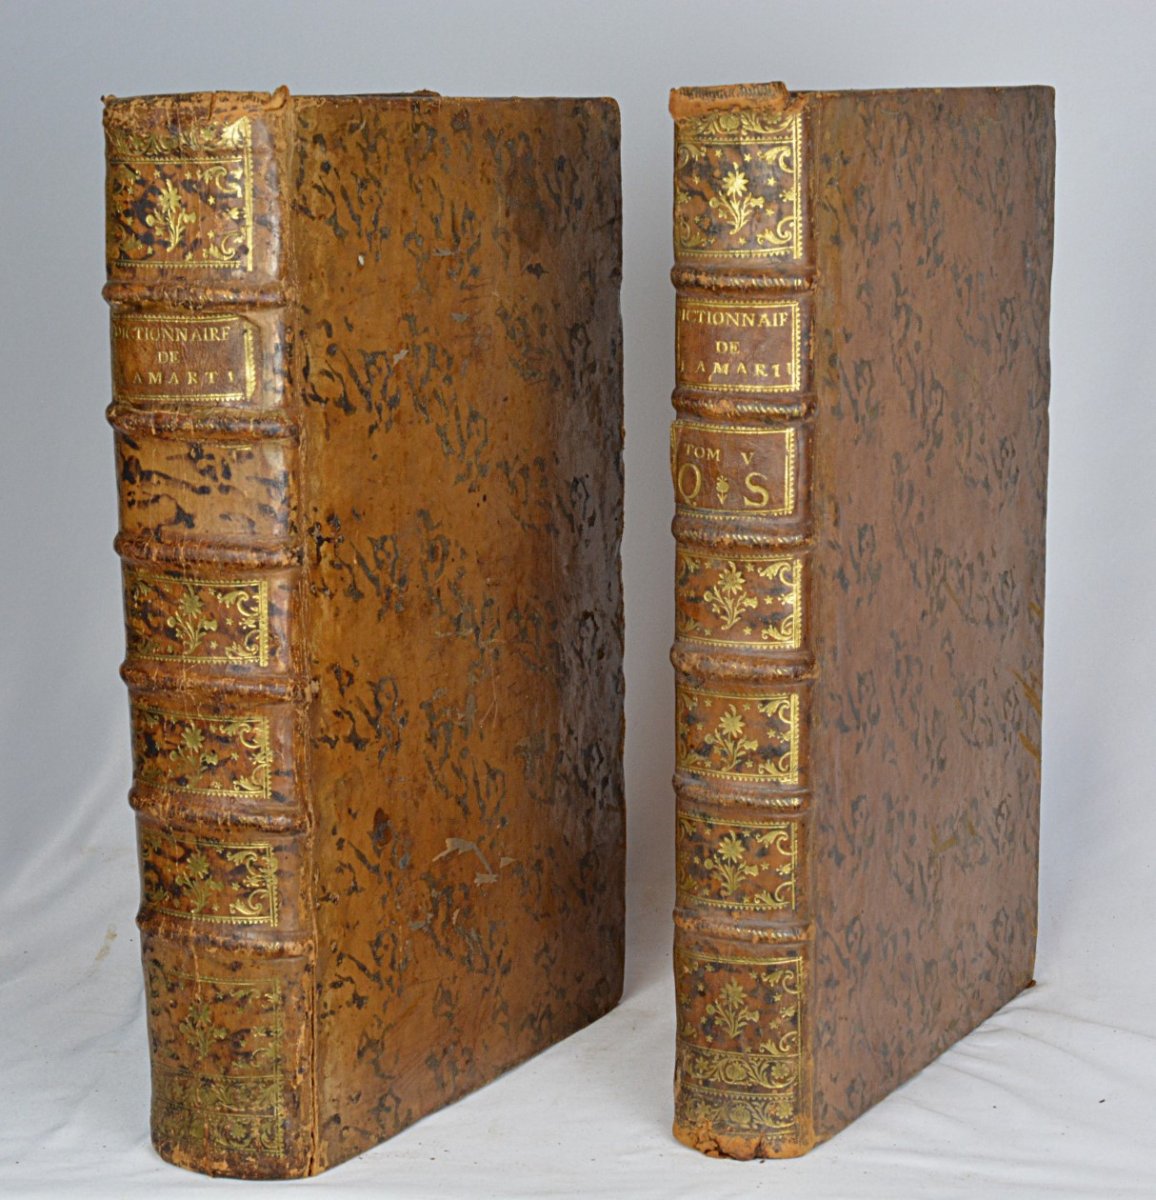 Geographical Dictionary Of La Martinière, In Six Volumes-photo-2